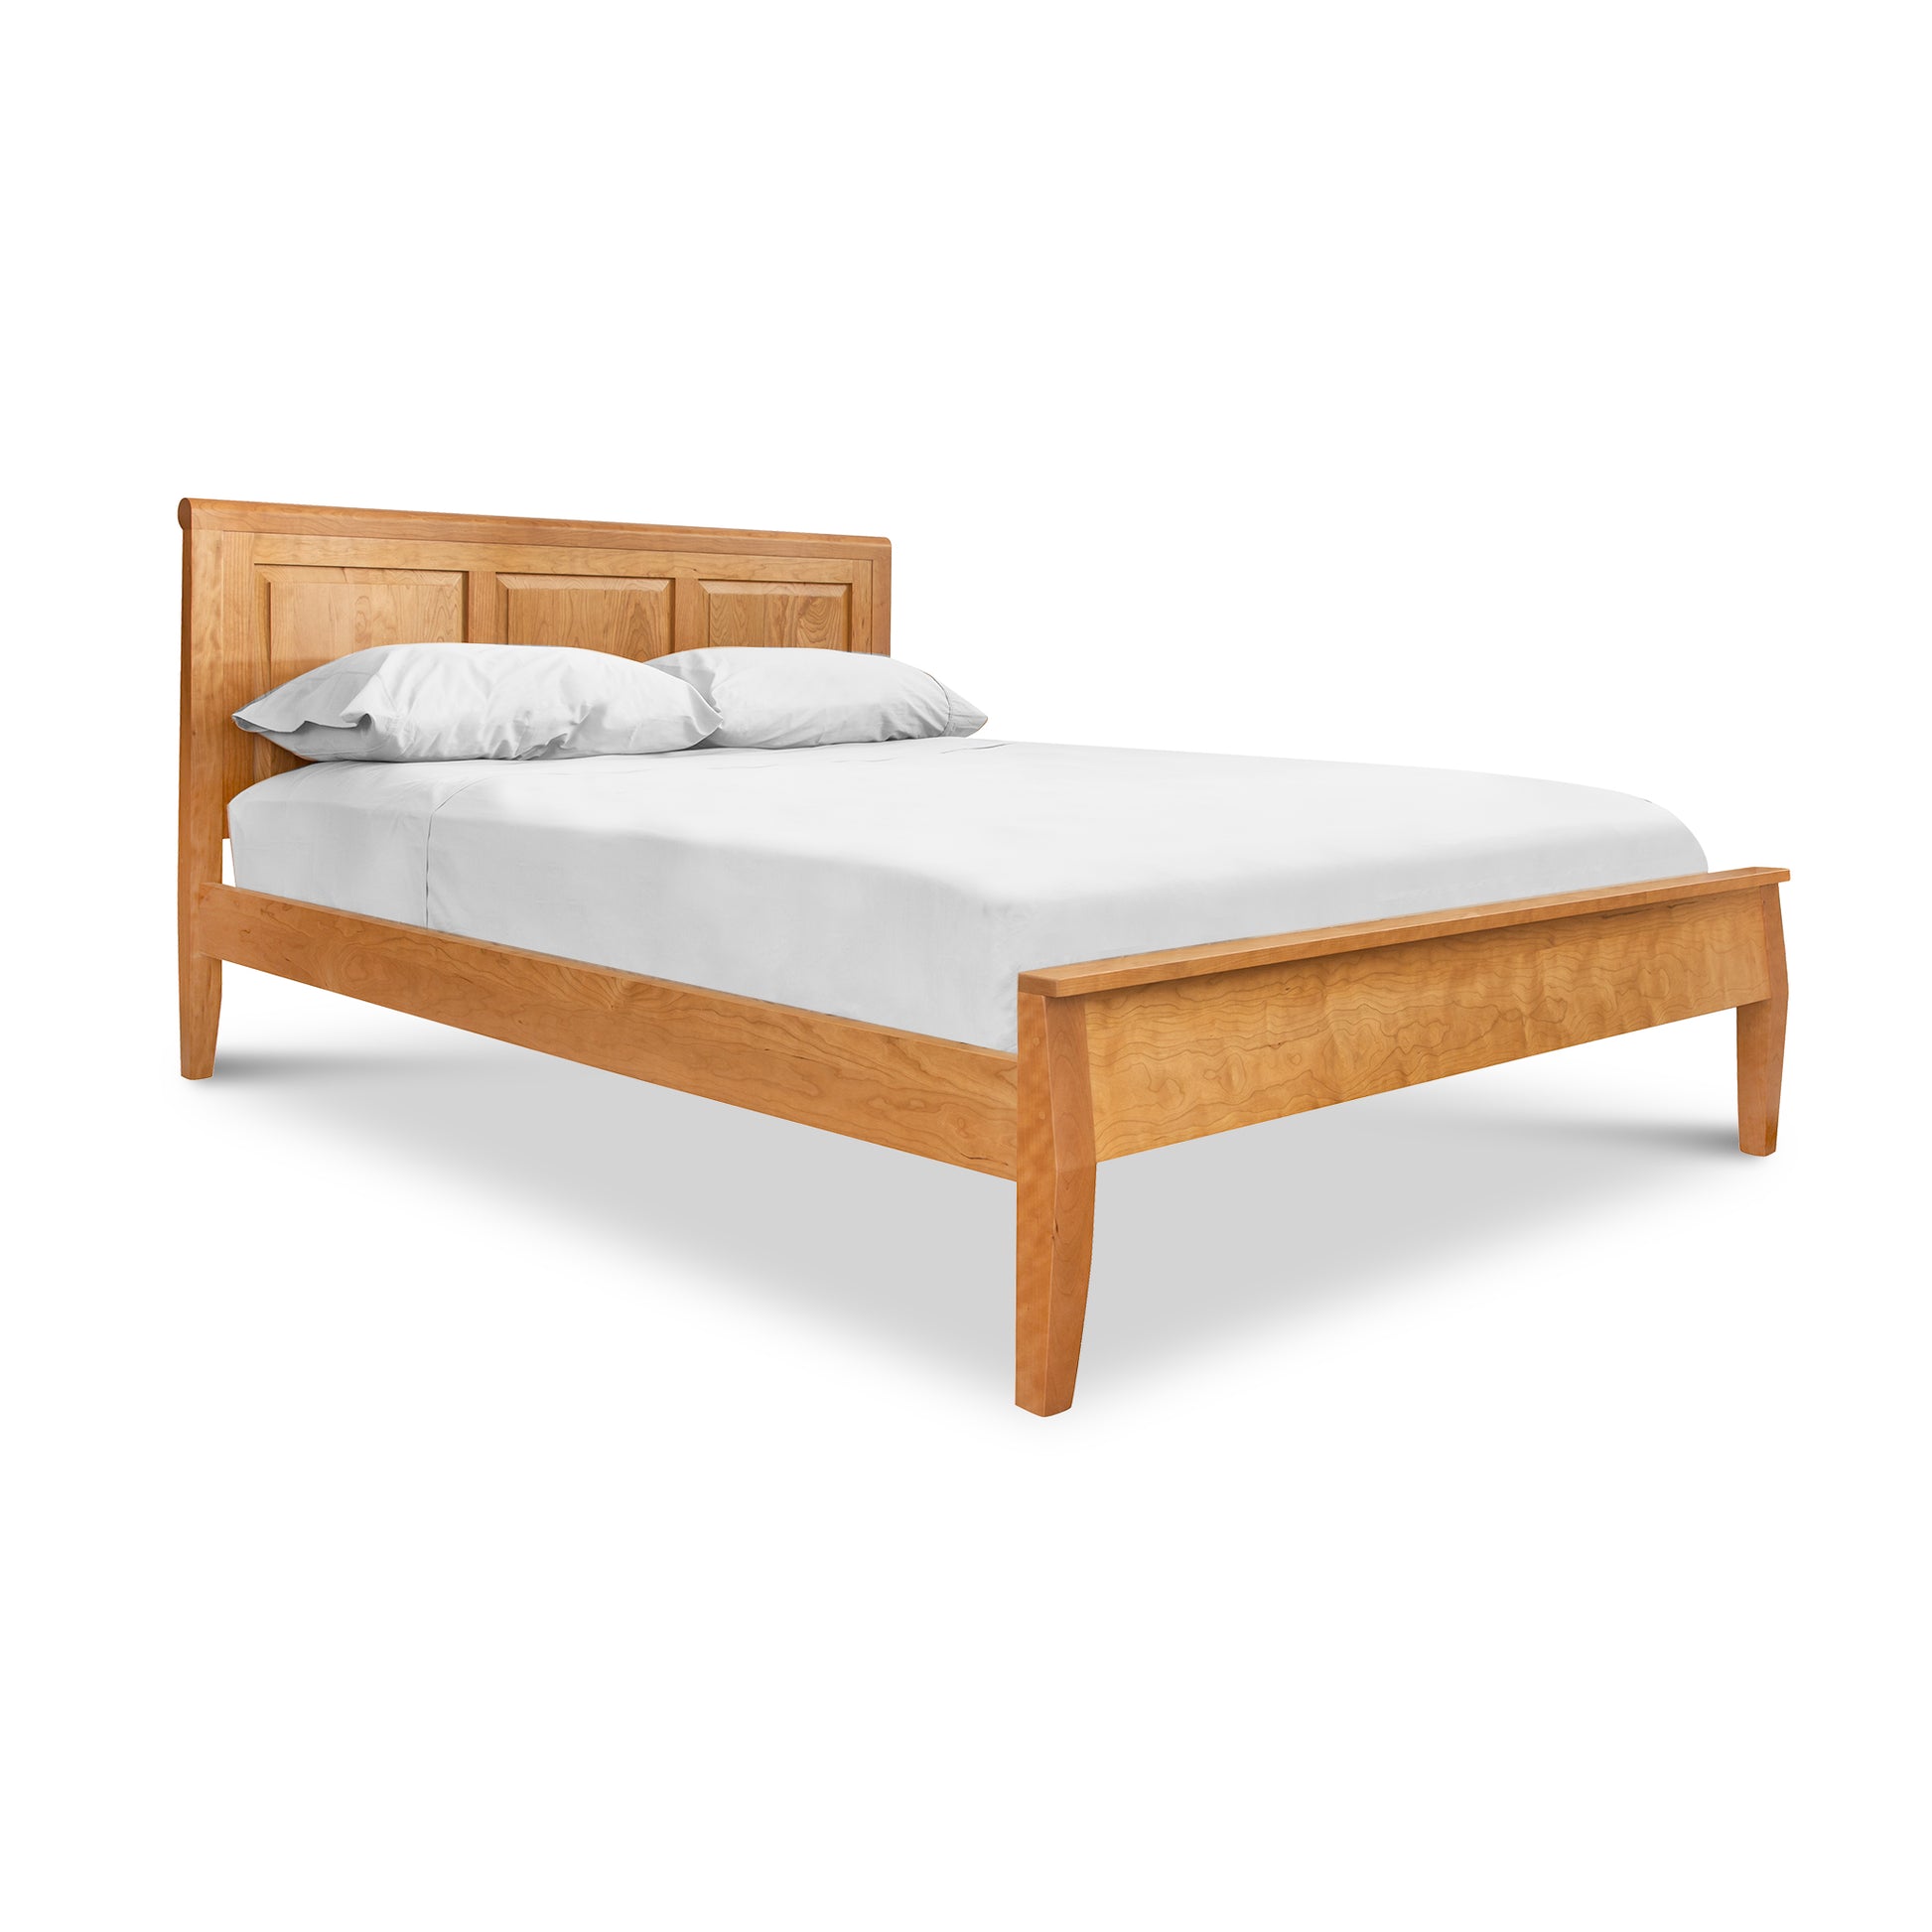 A solid hardwood Raised Panel Carriage Low Footboard Bed by Lyndon Furniture with comfortable white sheets on it.